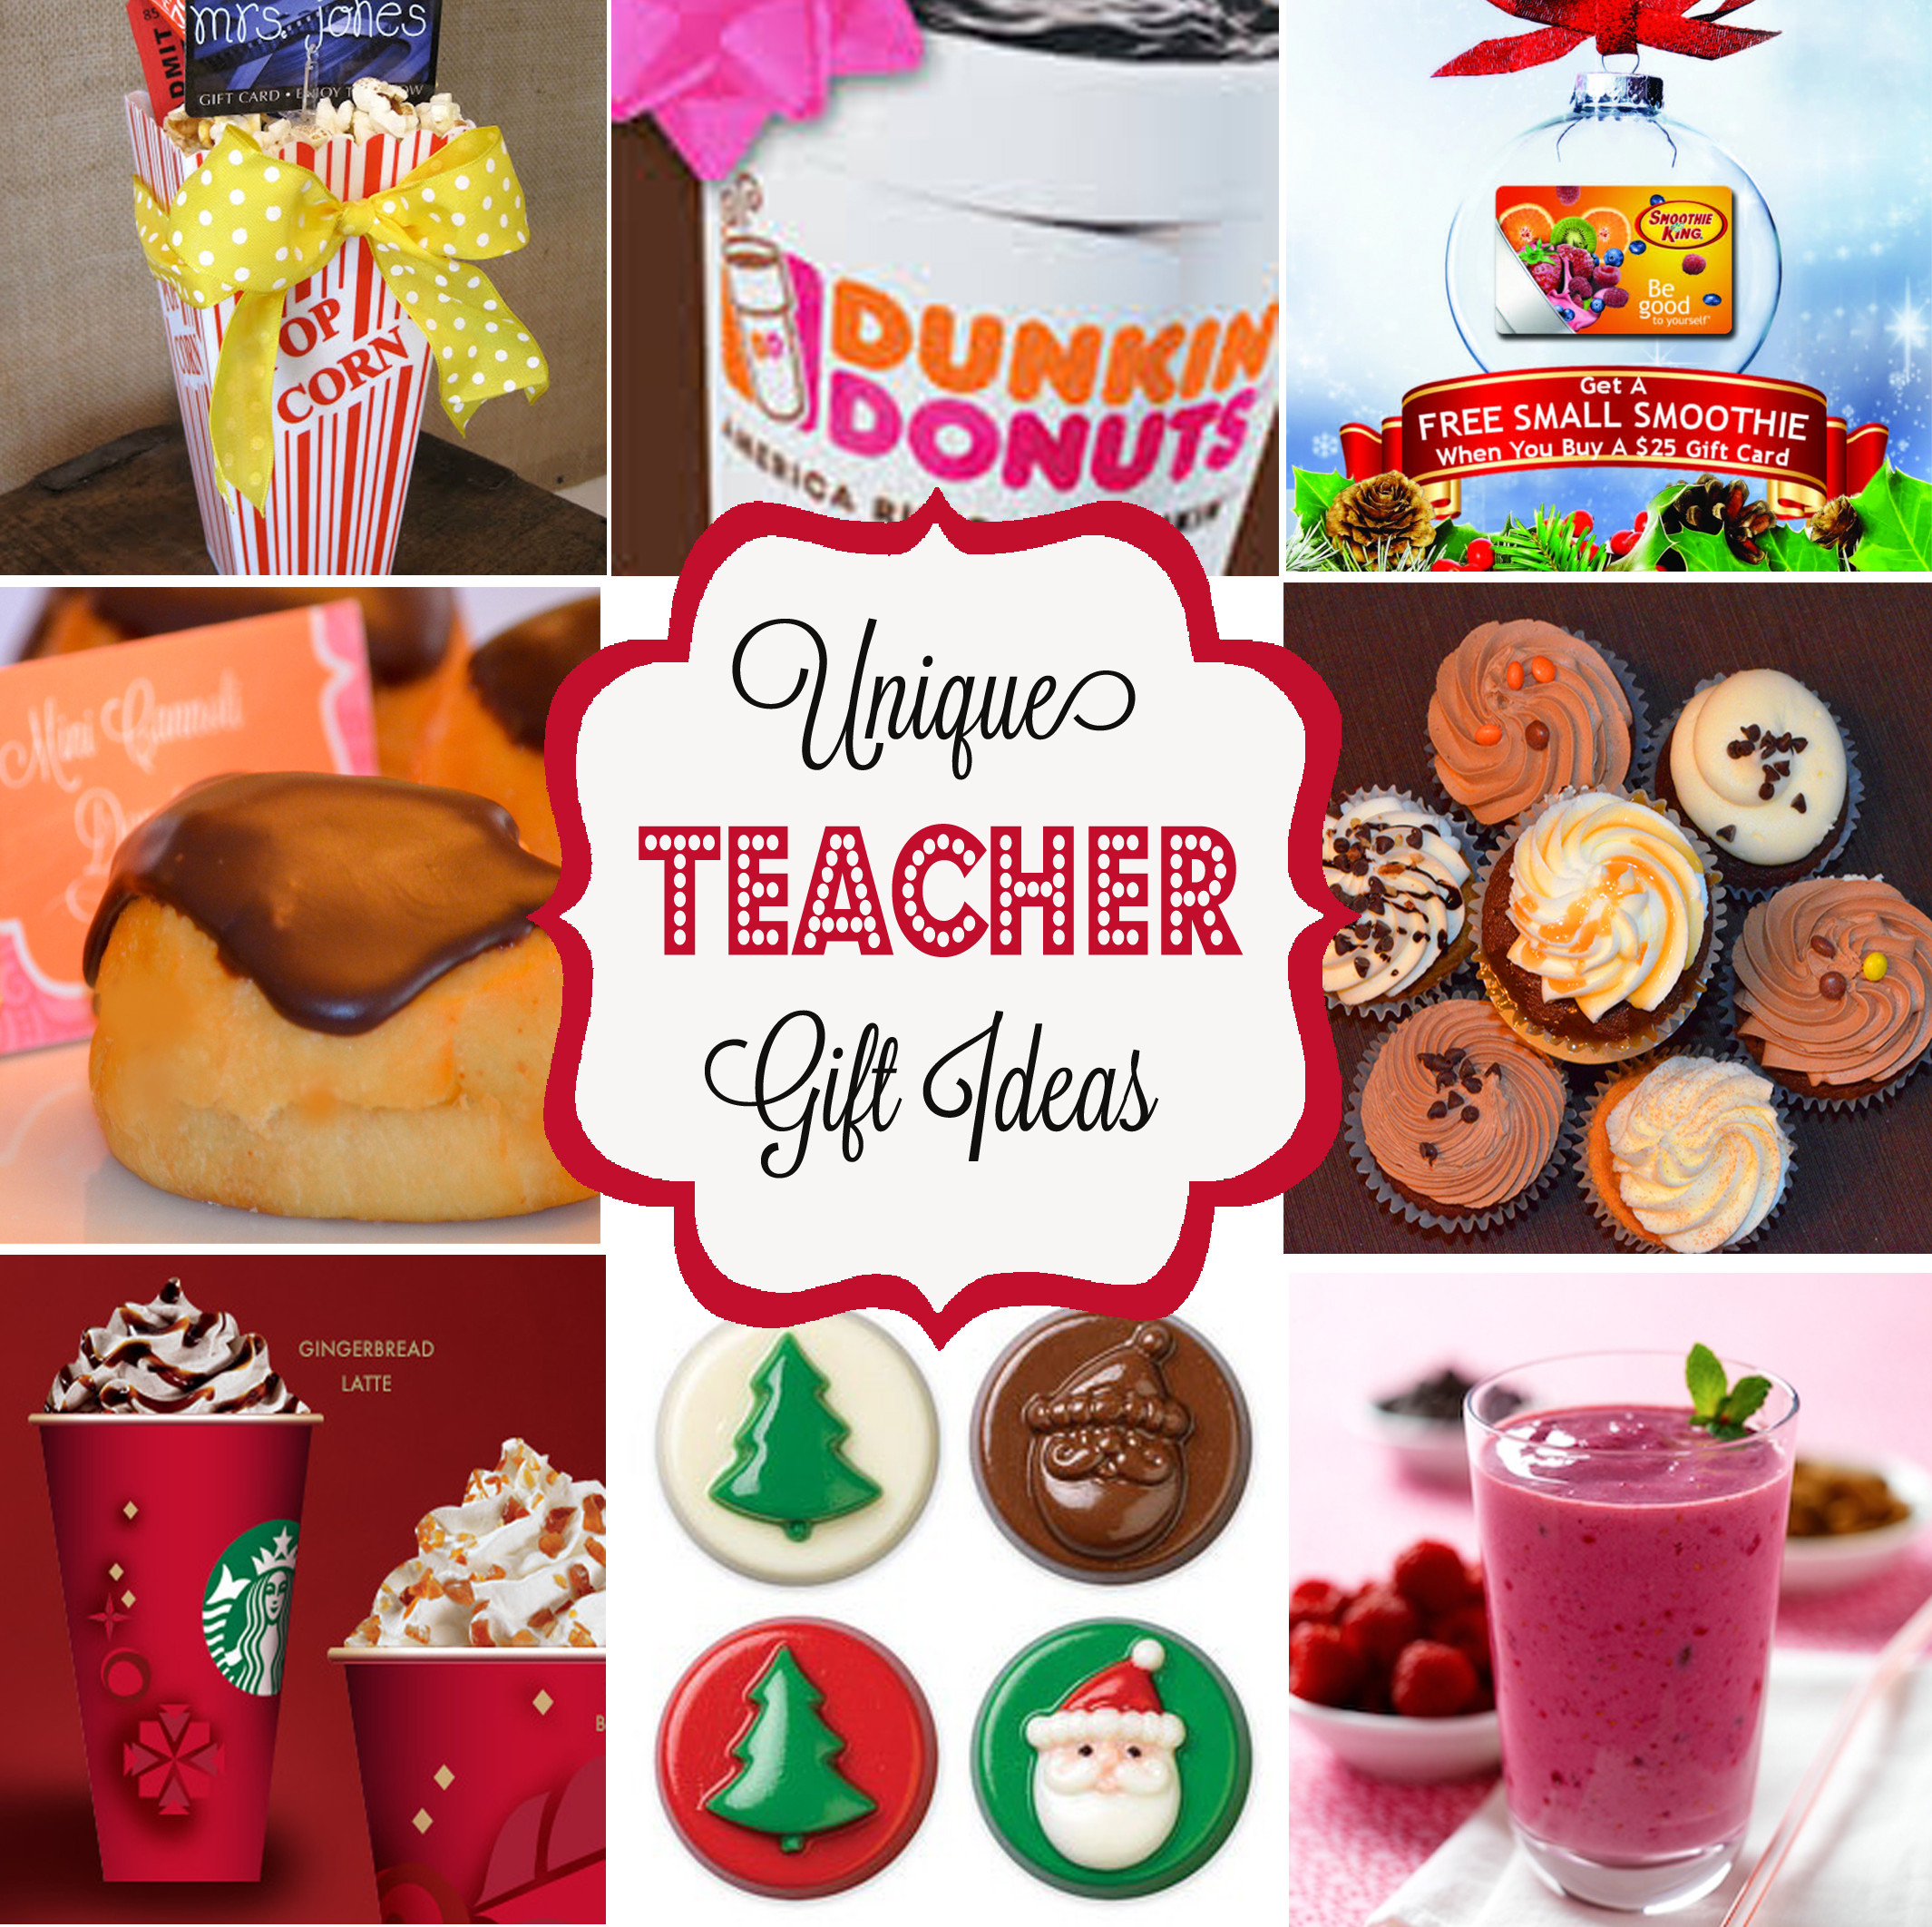 Holiday Gift Ideas For Teacher
 7 Unique Teacher Appreciation or Holiday Gift Ideas